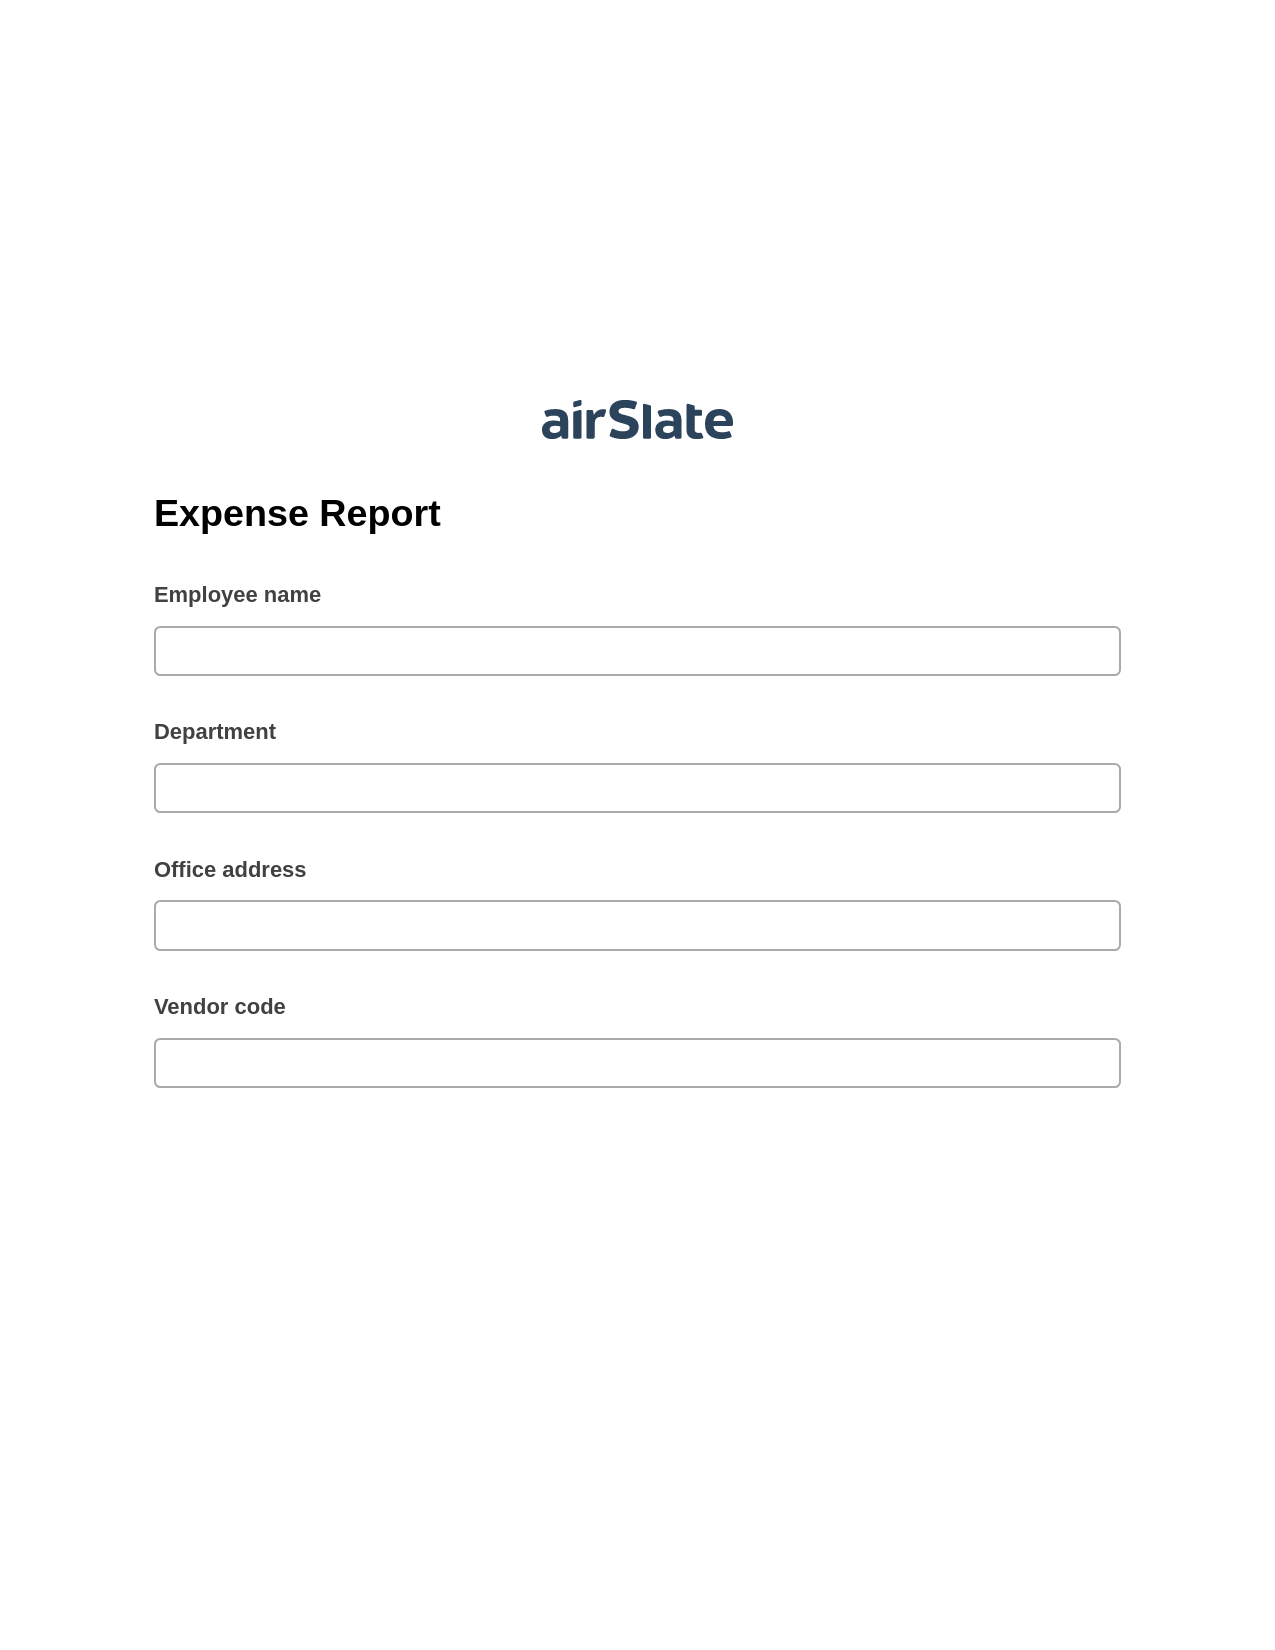 Expense Report Pre-fill from CSV File Bot, Set Signature Type Bot, Export to NetSuite Record Bot